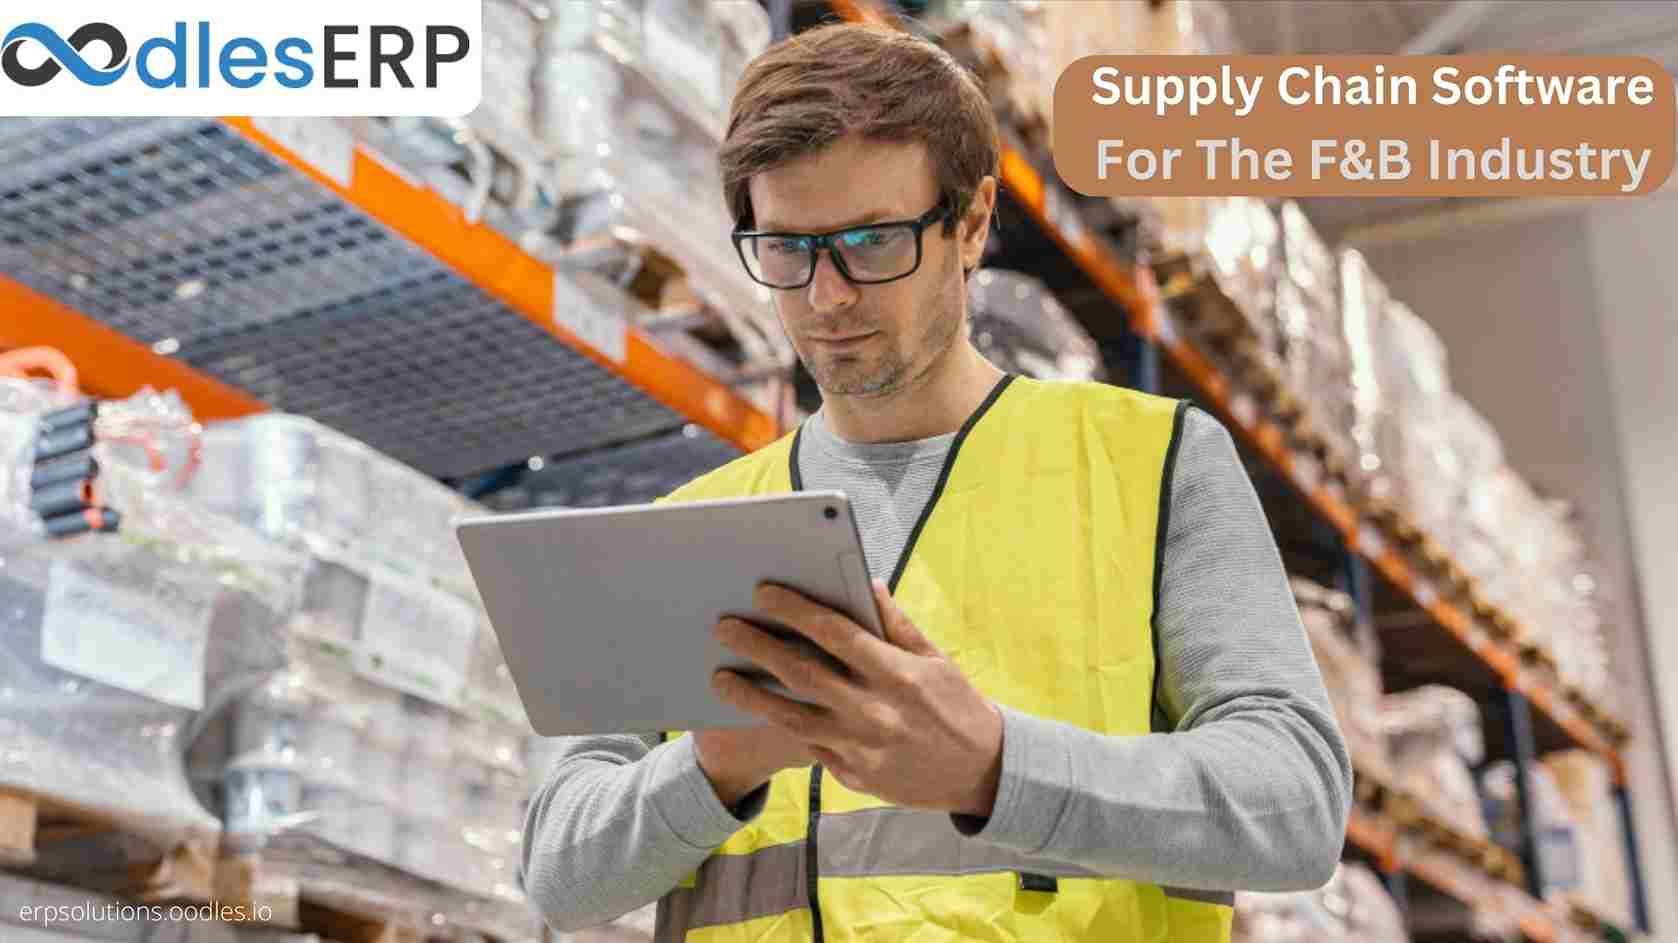 Supply Chain Software Development For The F&B Industry